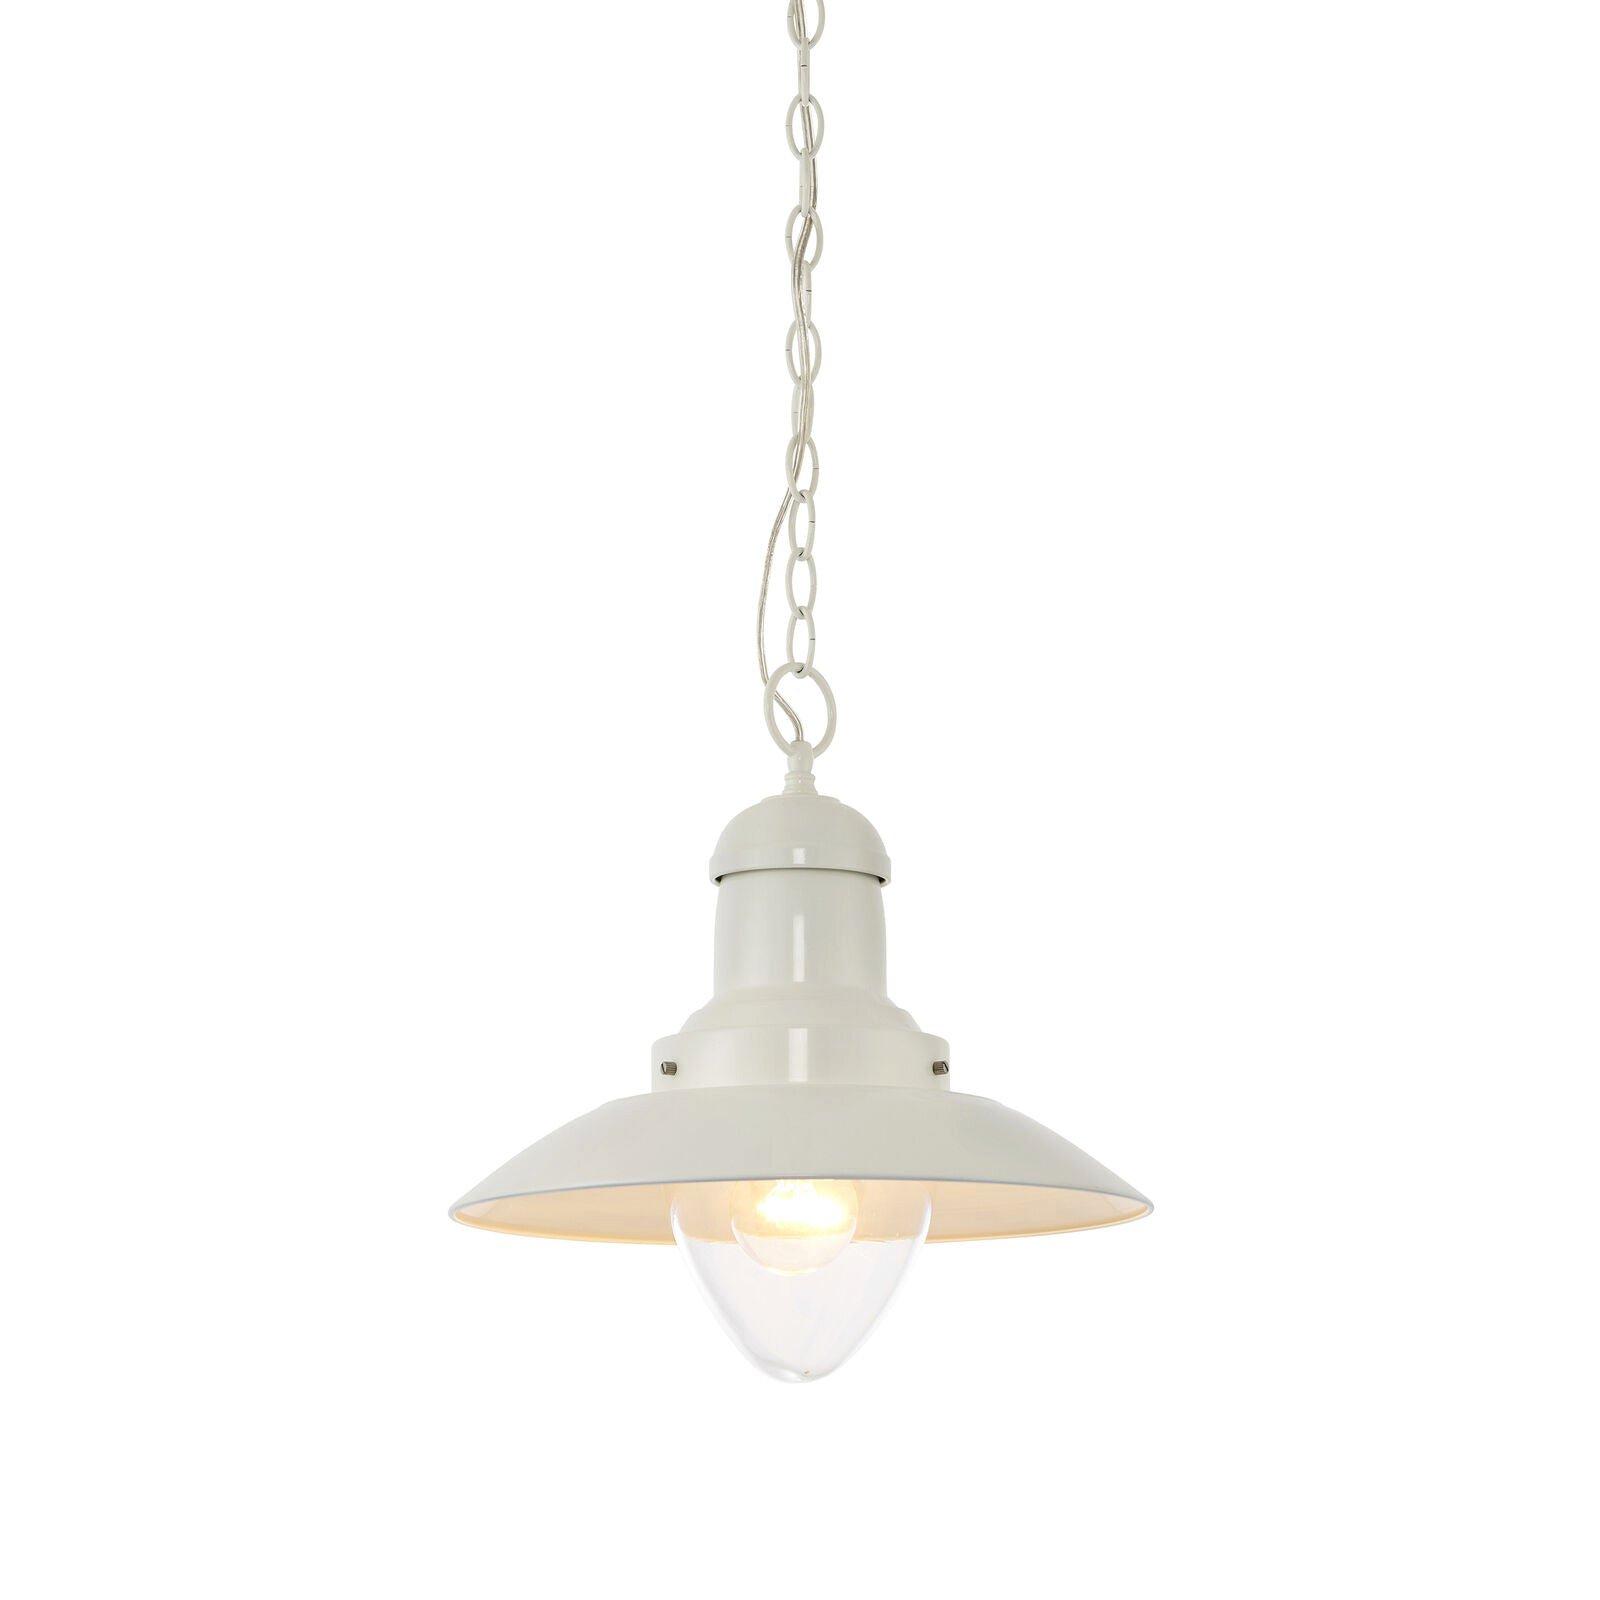 Ceiling Pendant Light - Gloss Cream & Clear Glass - 42W E27 - Dimmable